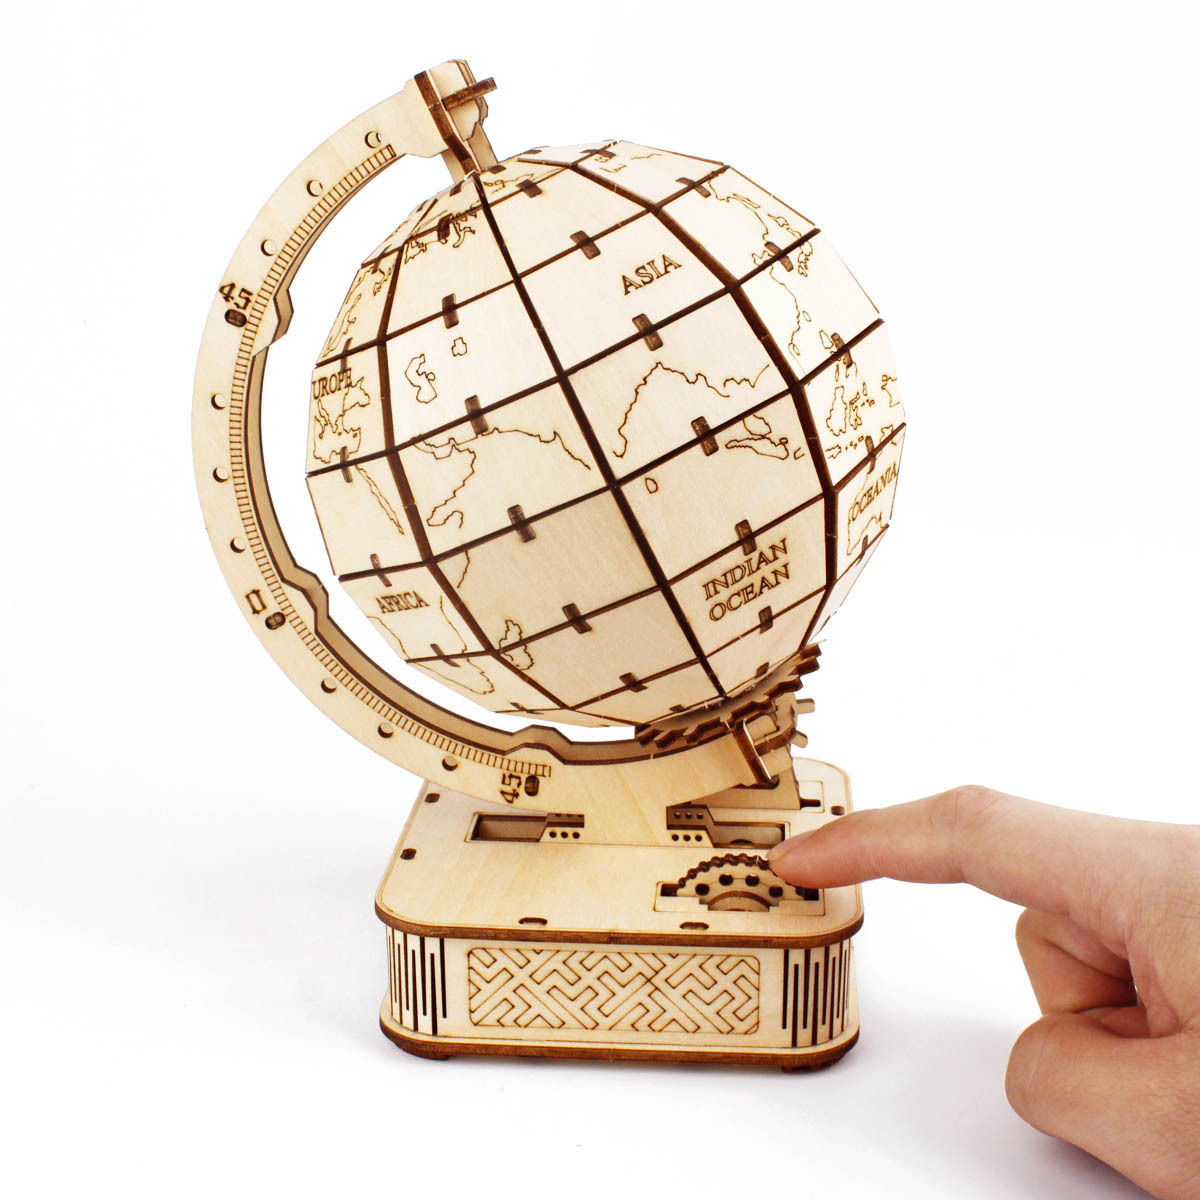 

3d Wooden Puzzle Globe. Model Kits Diy Crafts Handmade Christmas Gifts